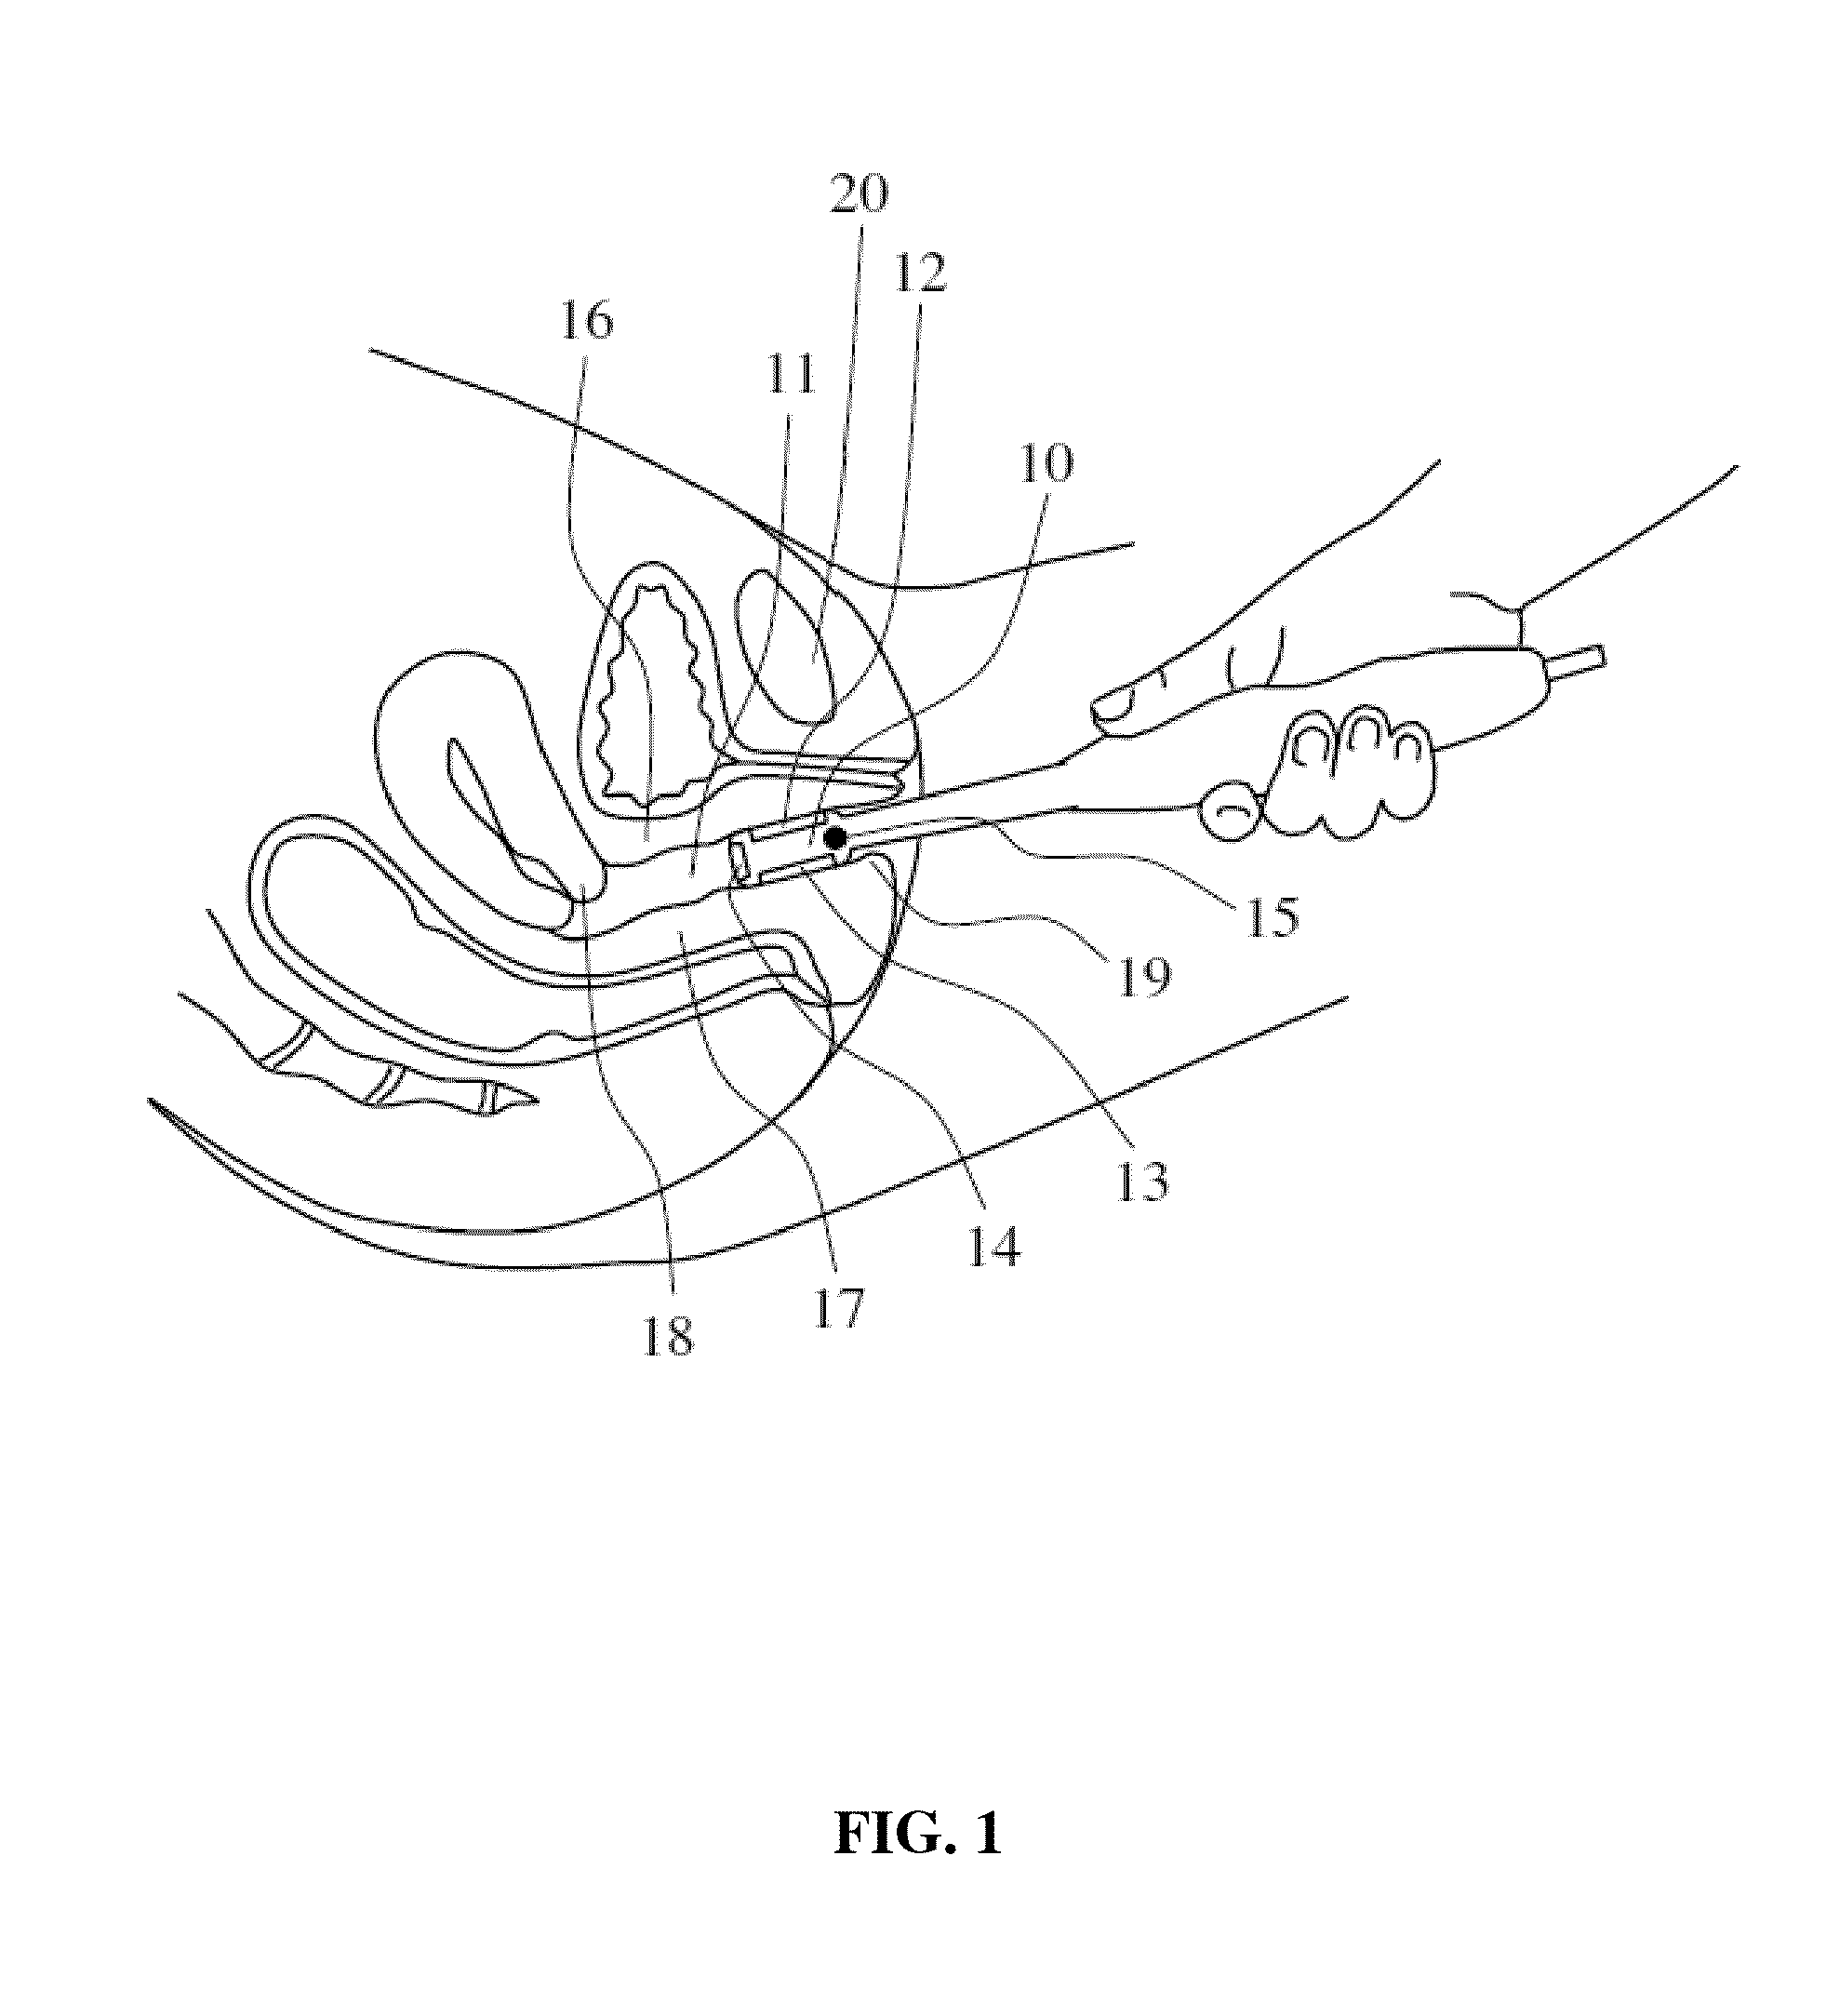 Methods and devices for biomechanical assessment of pelvic floor including perineum prior to childbirth